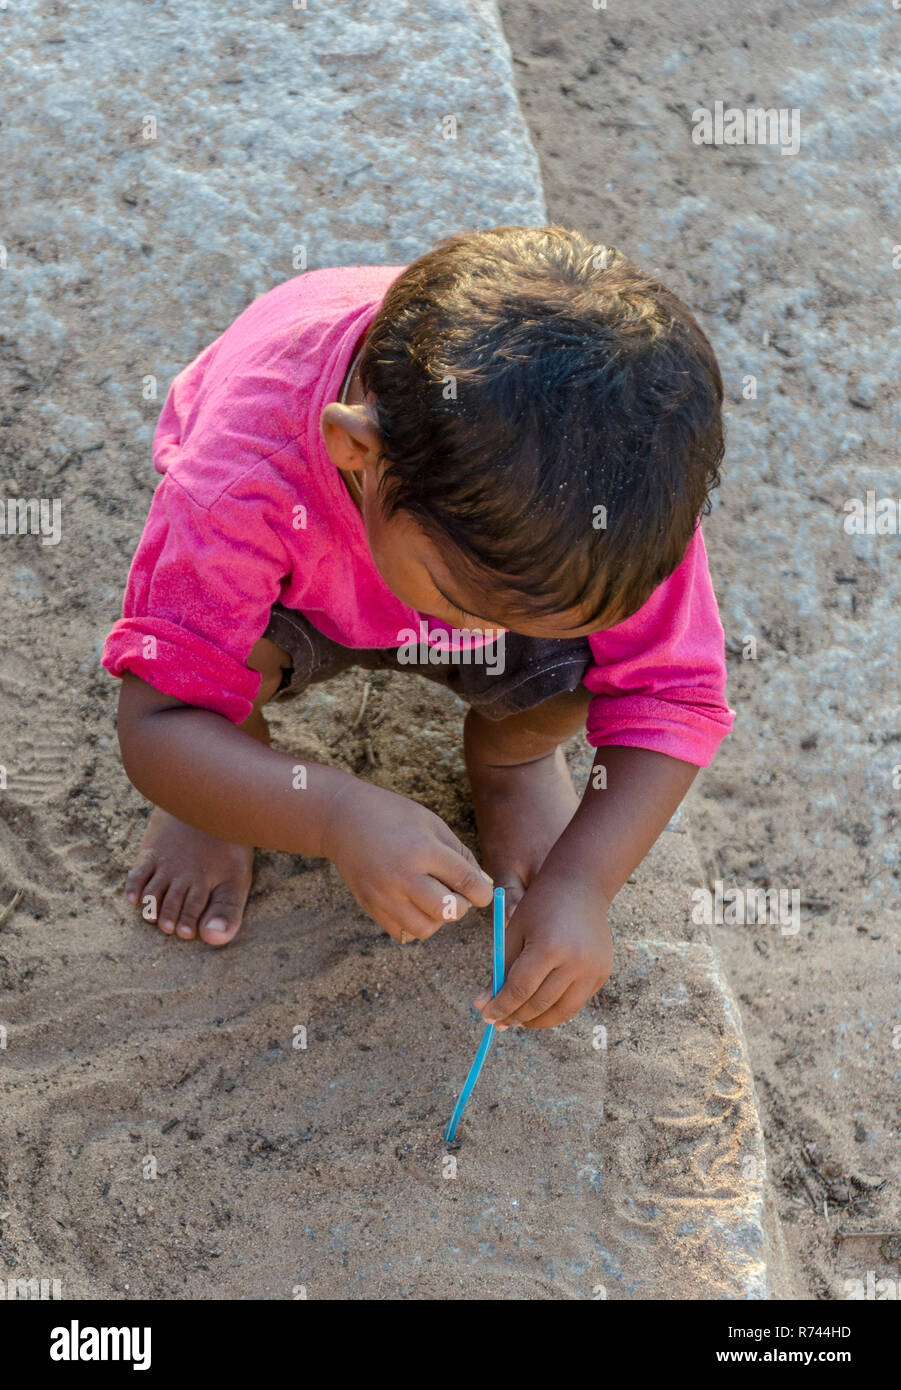 Overhead view of a young Indian kid playing with a plastic straw, pouring sand through it. Stock Photo